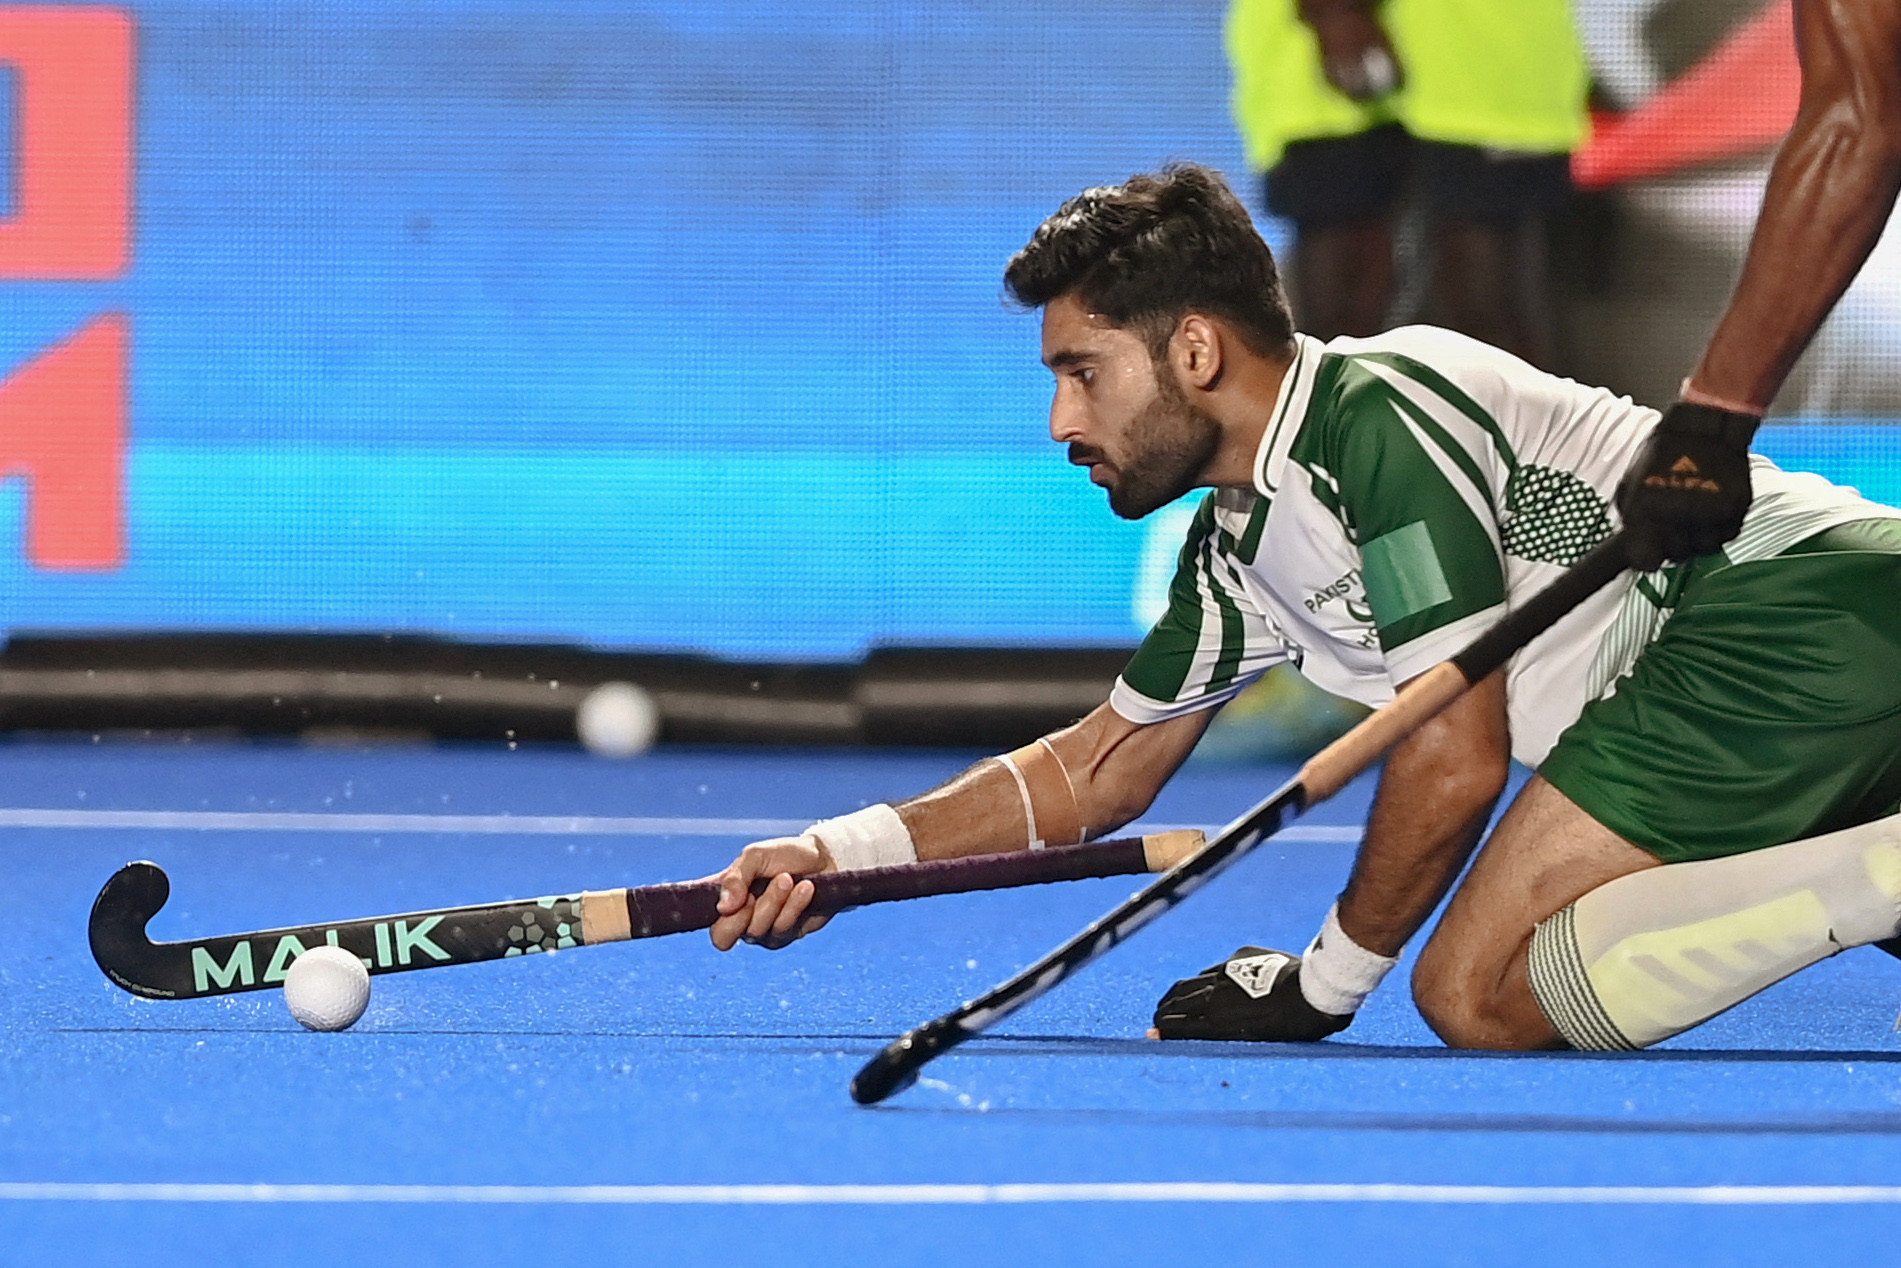 Exclusive: FIH confident that Paris 2024 Olympic qualifier can be staged in Pakistan despite disturbances